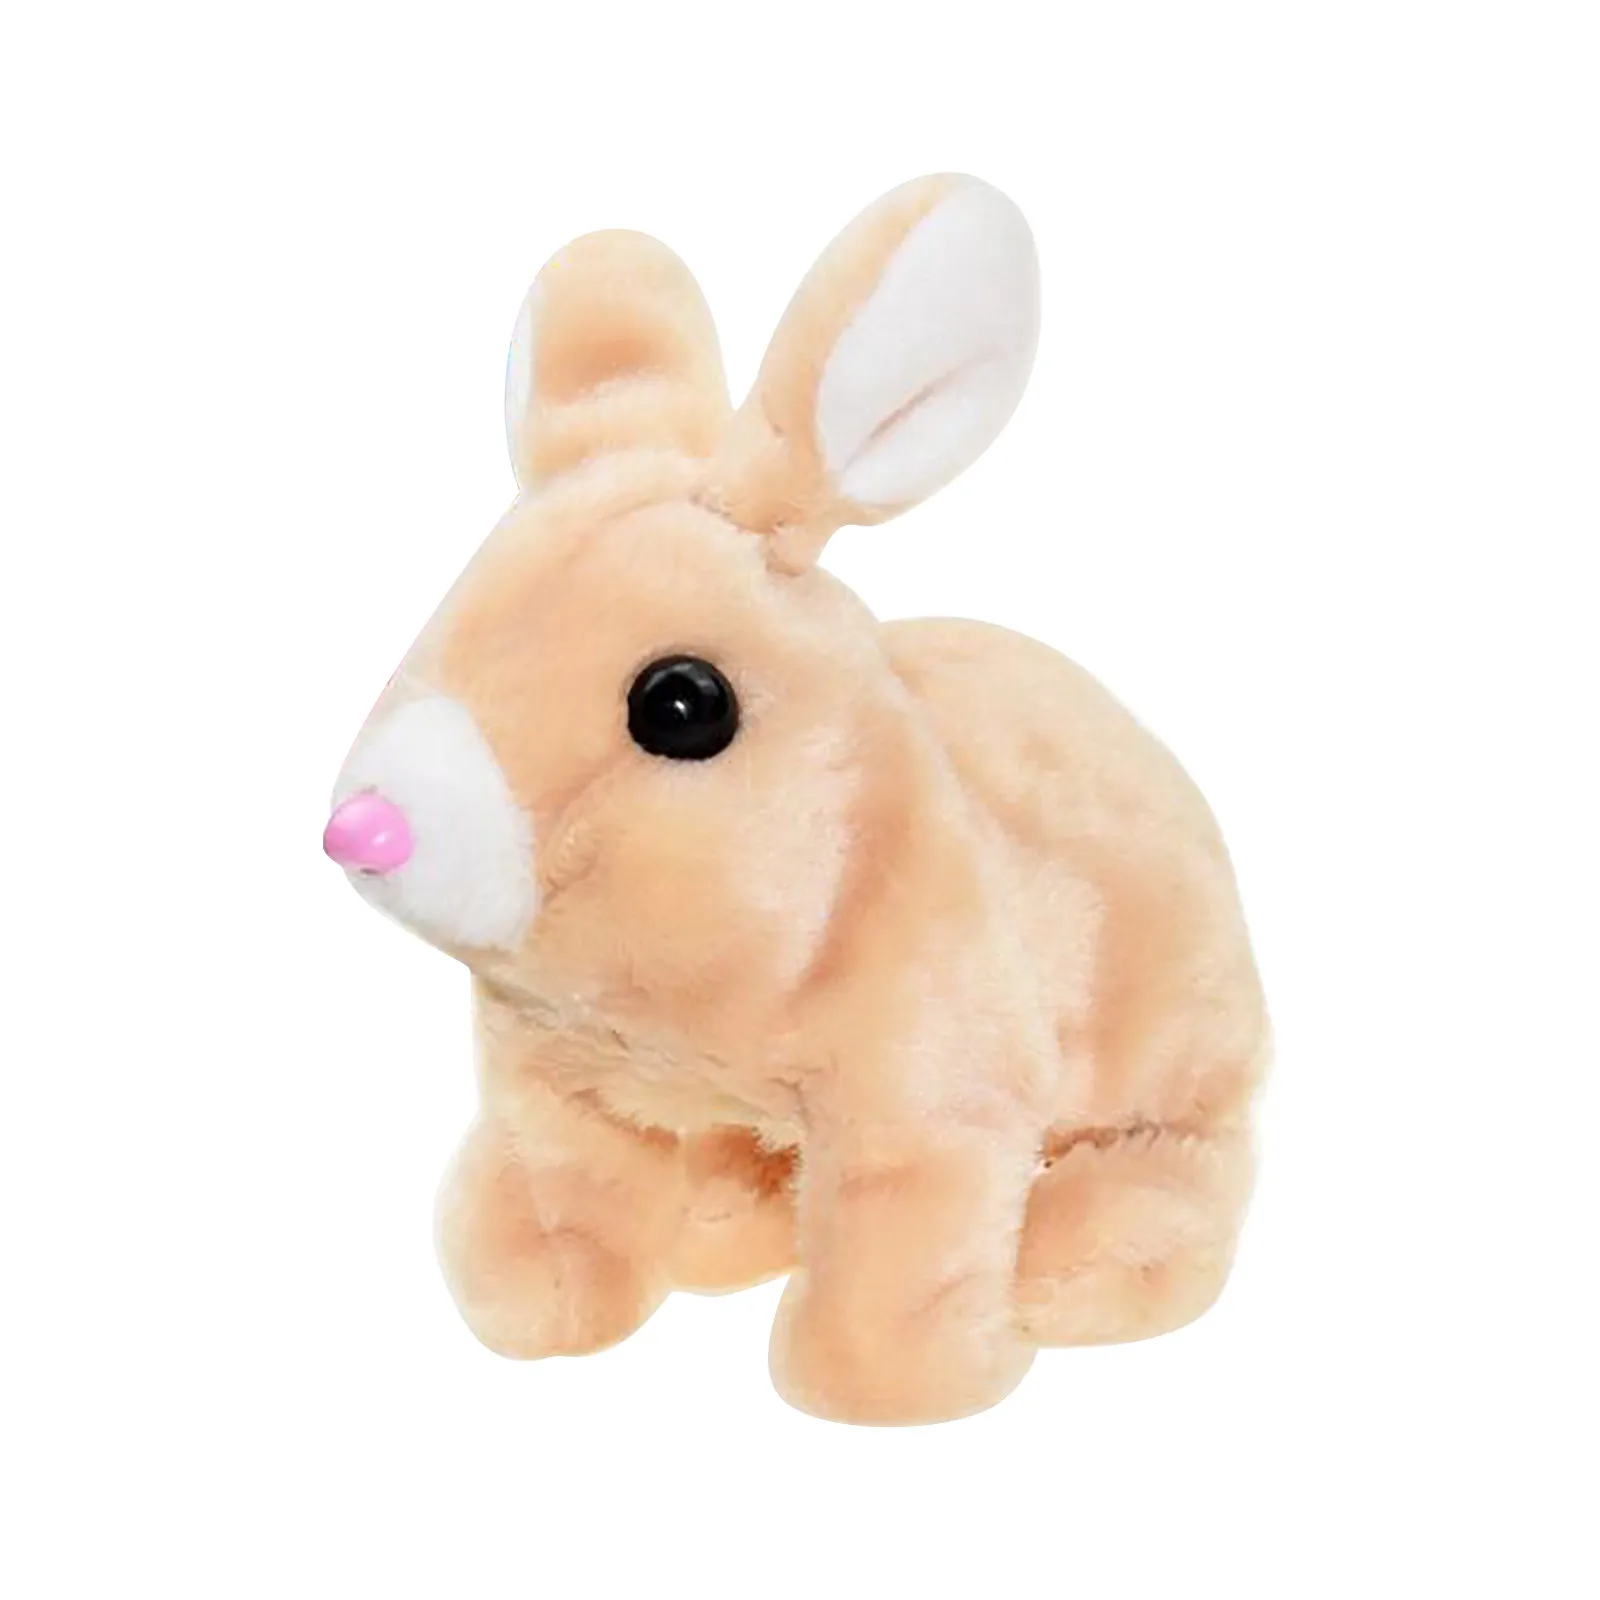 Details about   Plush Rabbit Lifelike Animal Easter Home Ornament Simulation Toy Mo ZL